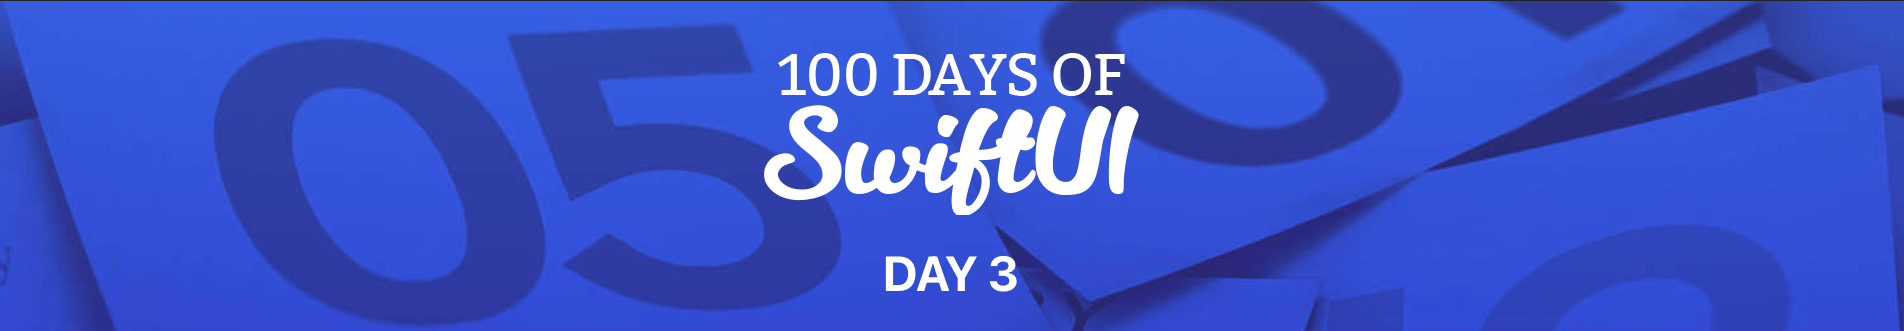 100 Days of SwiftUI - Day 3